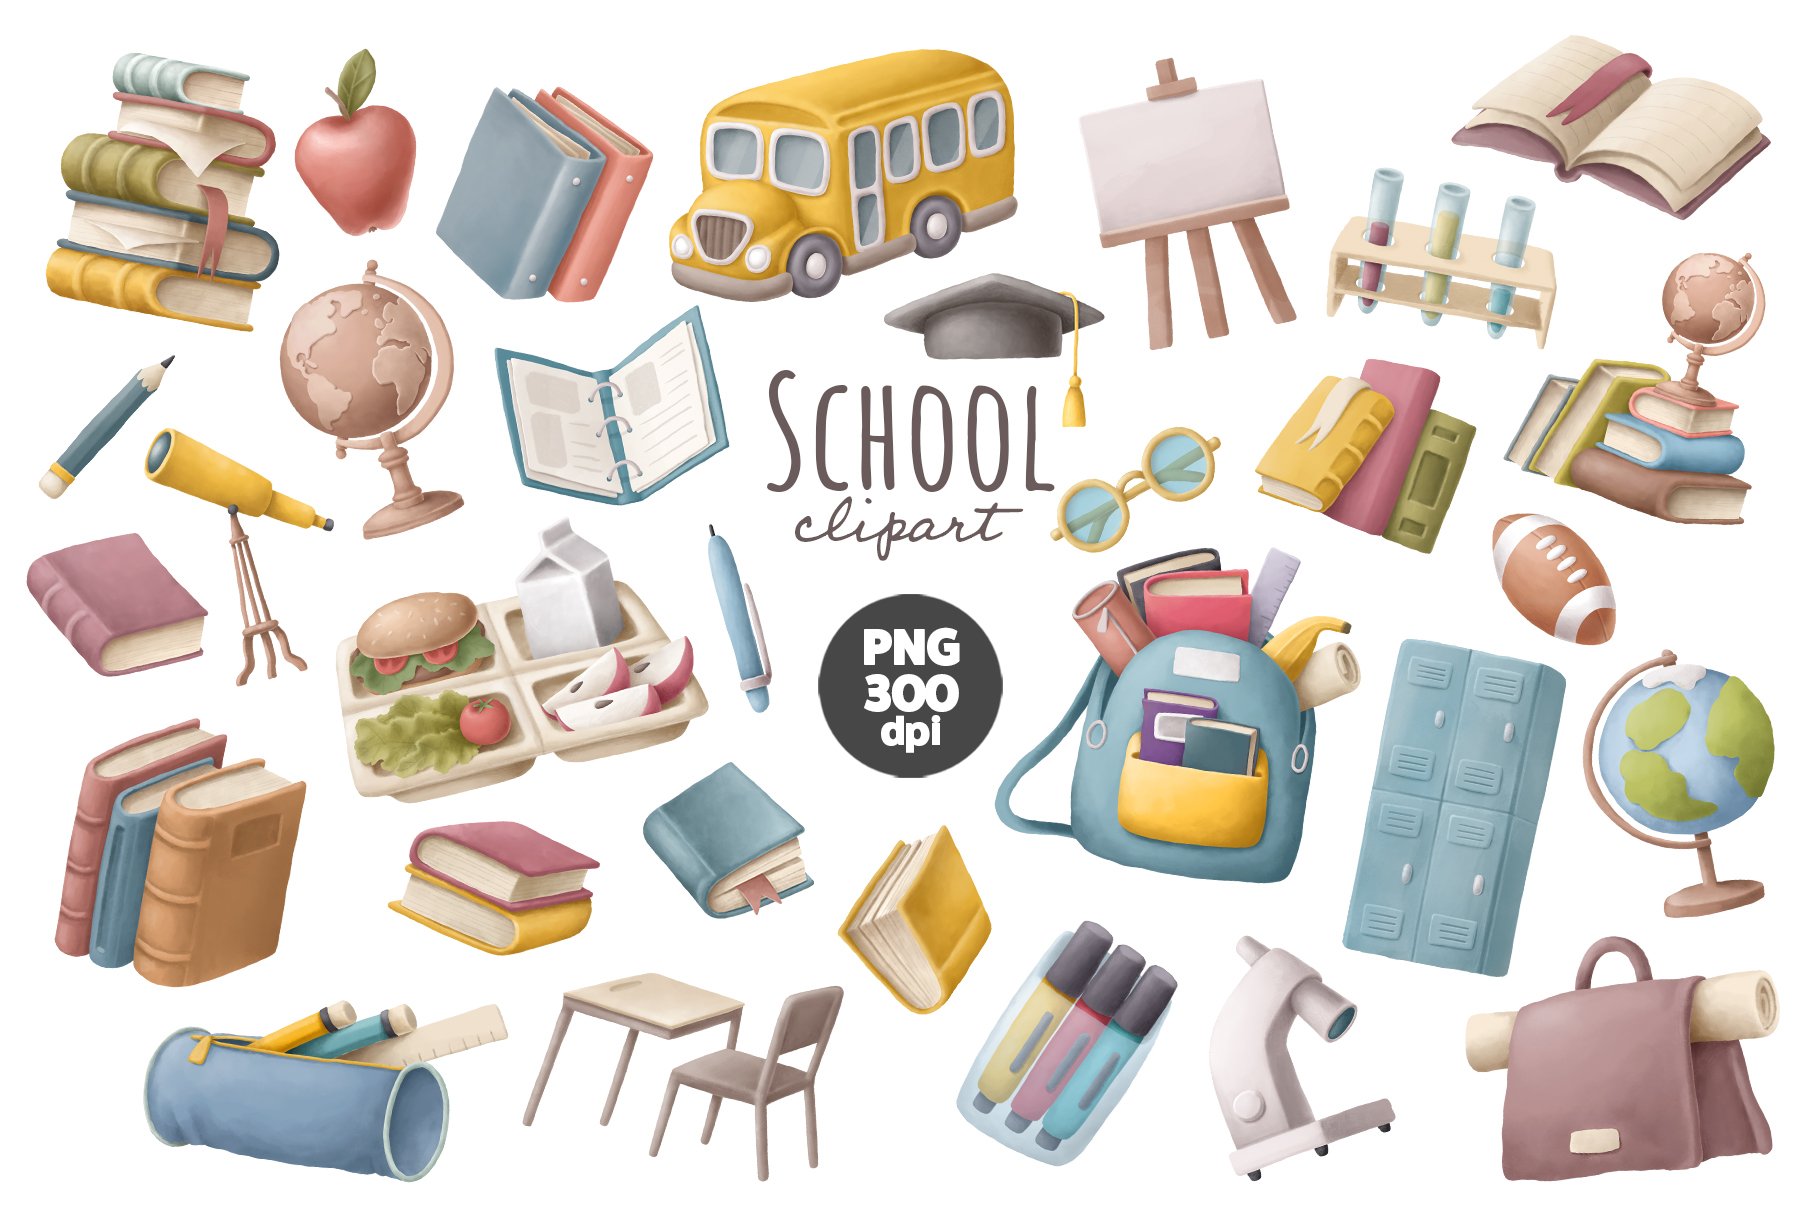 School clipart cover image.